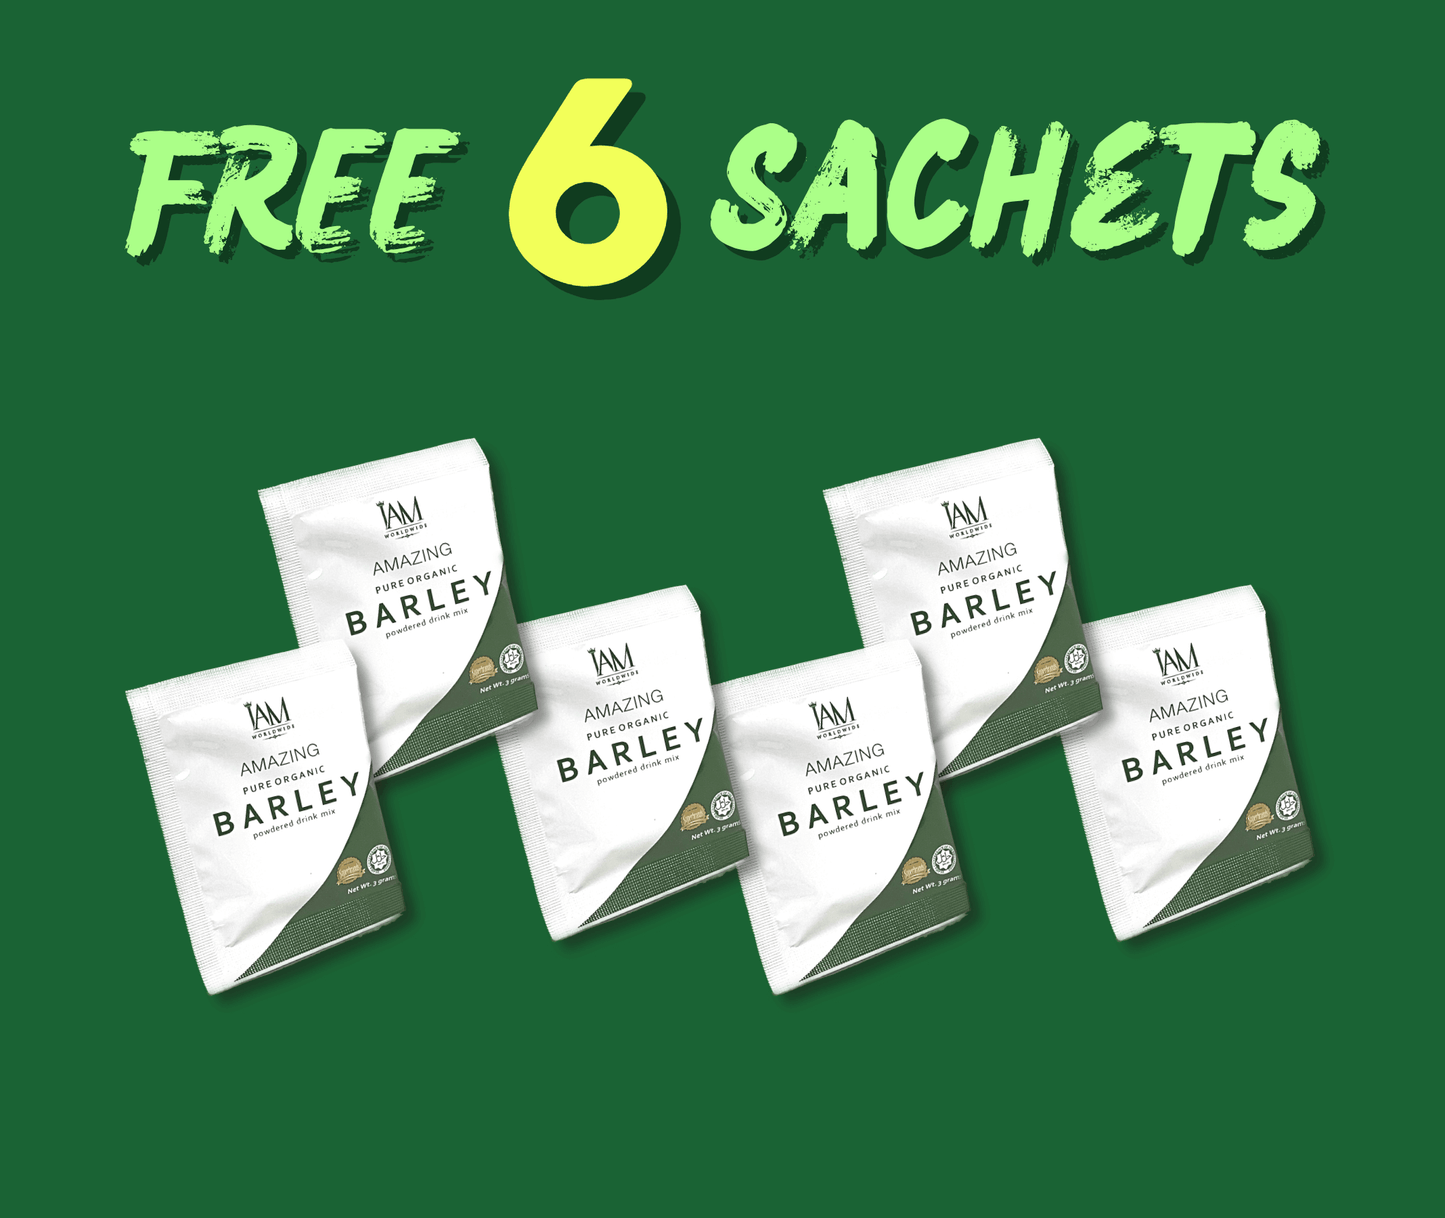 BARLEY SULIT PACK - Buy 6 BOXES Get 6 Sachets for Free